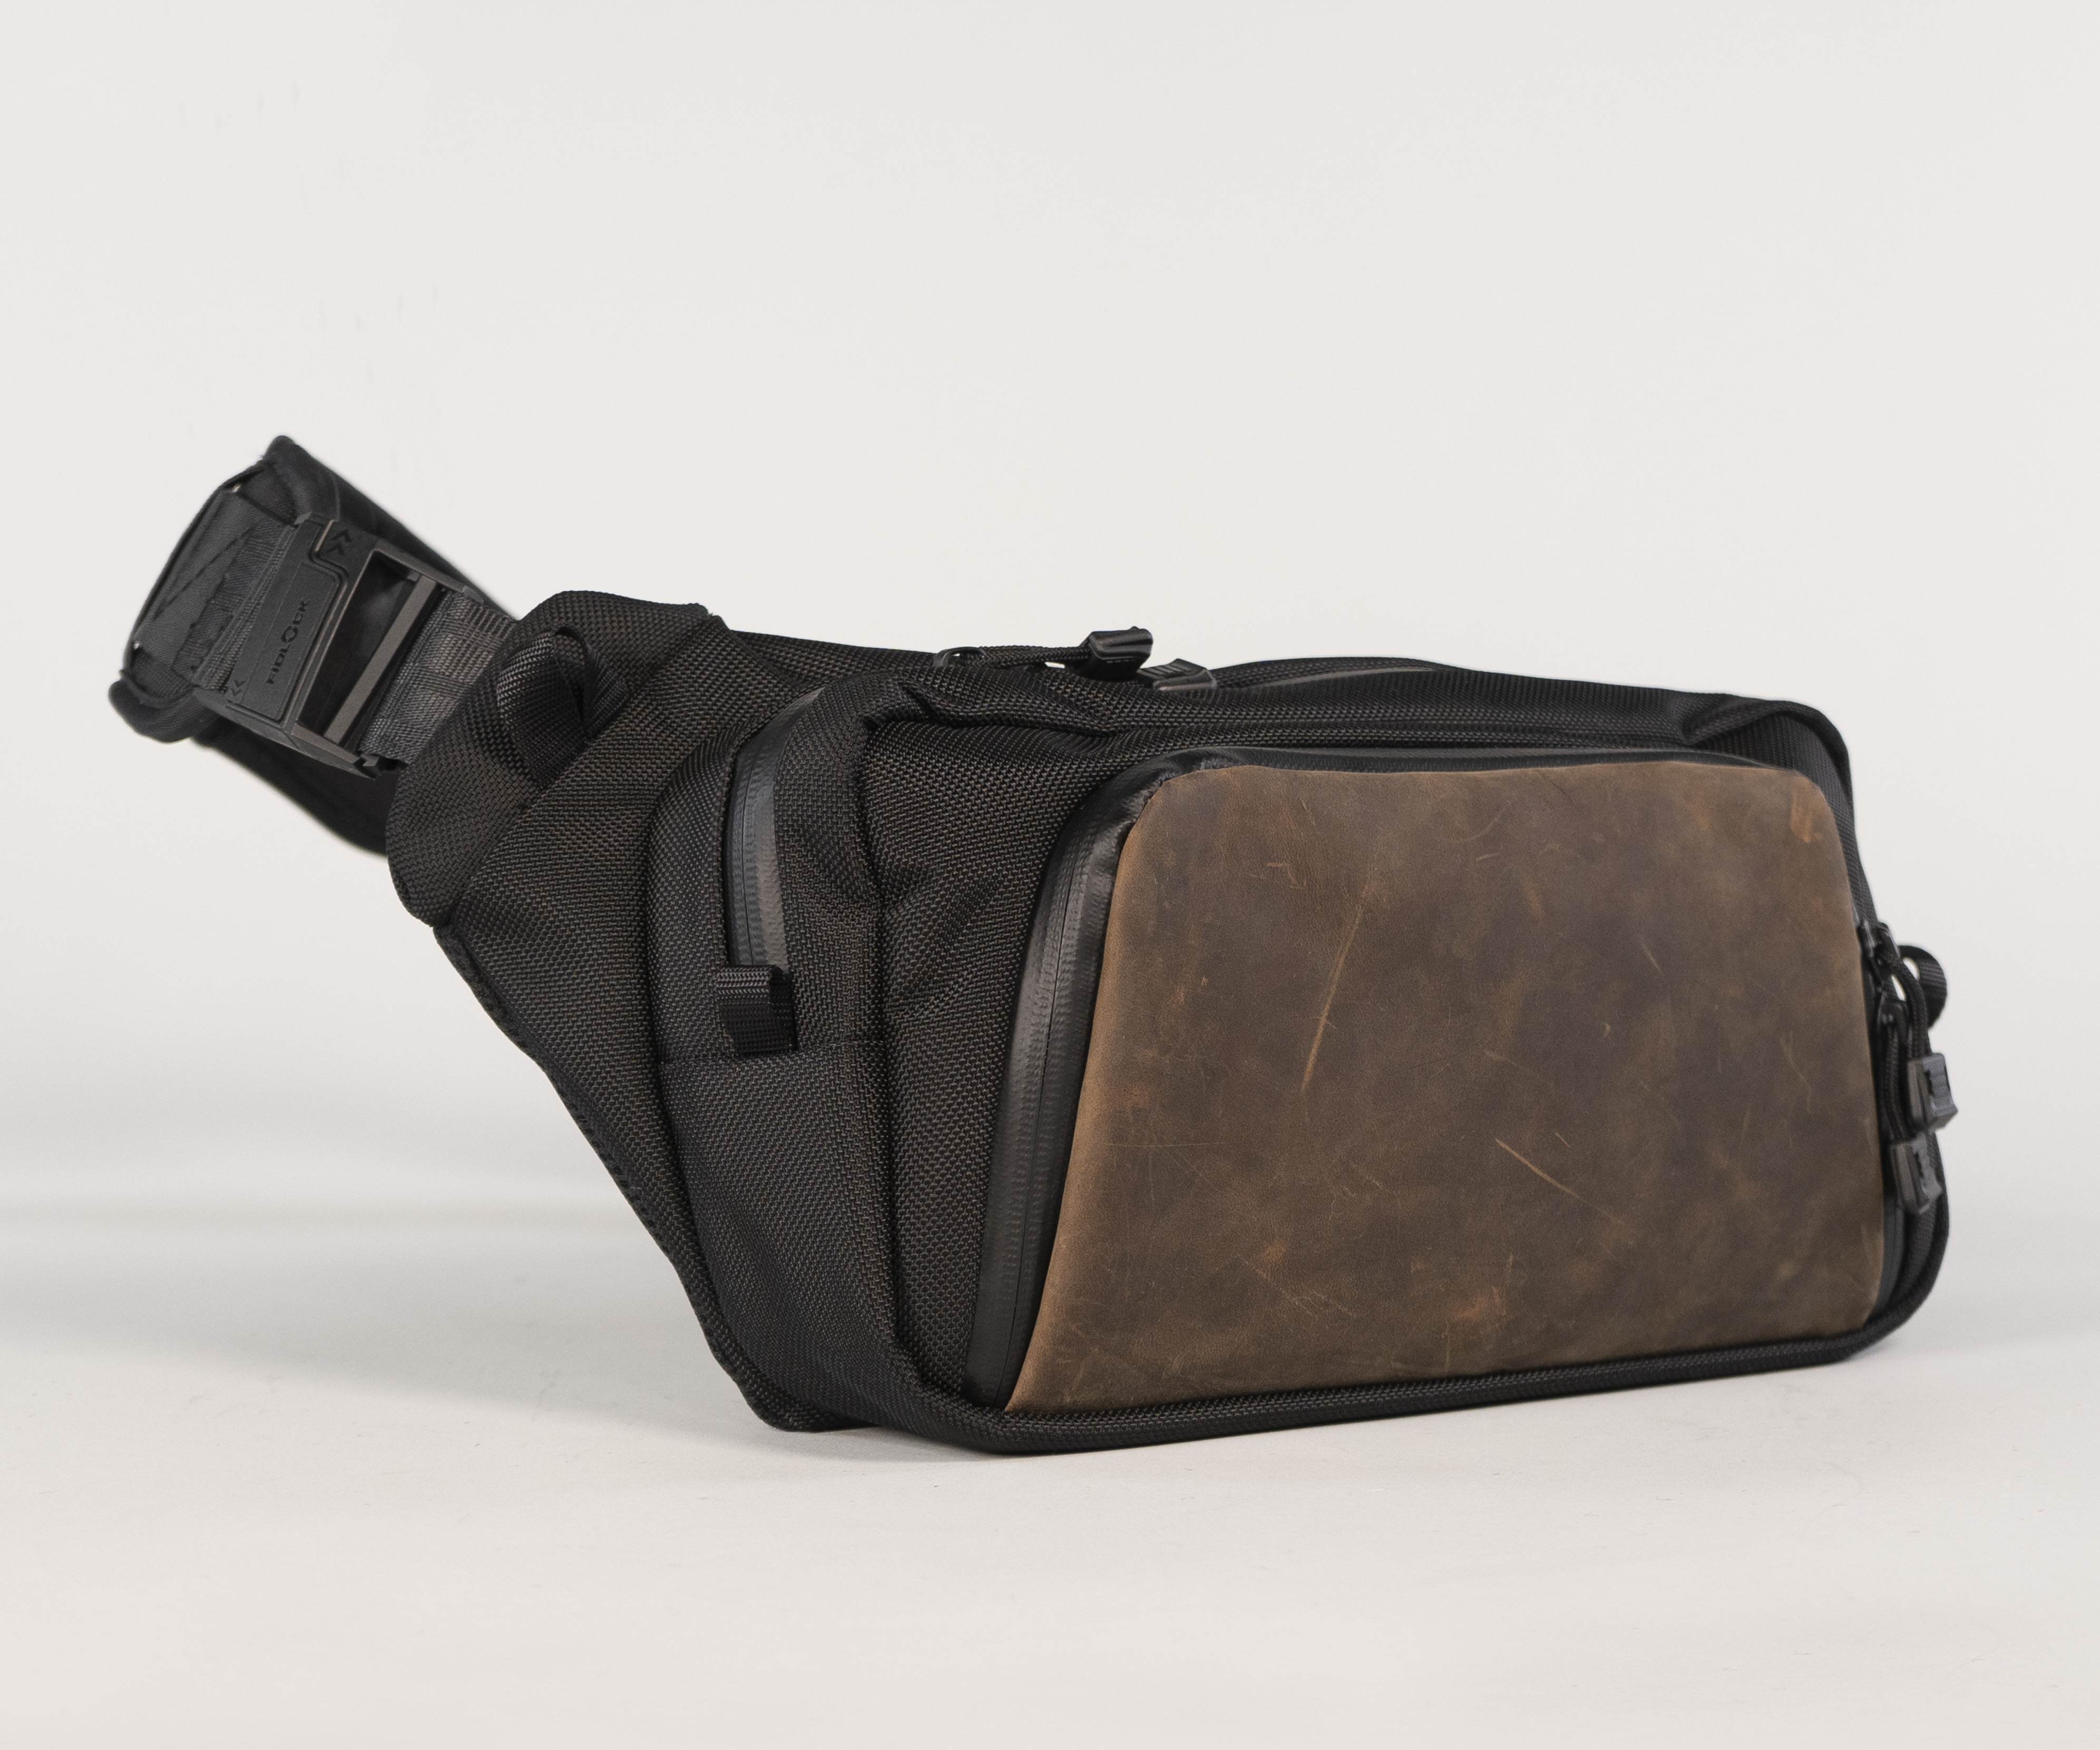 Moto Sling side view